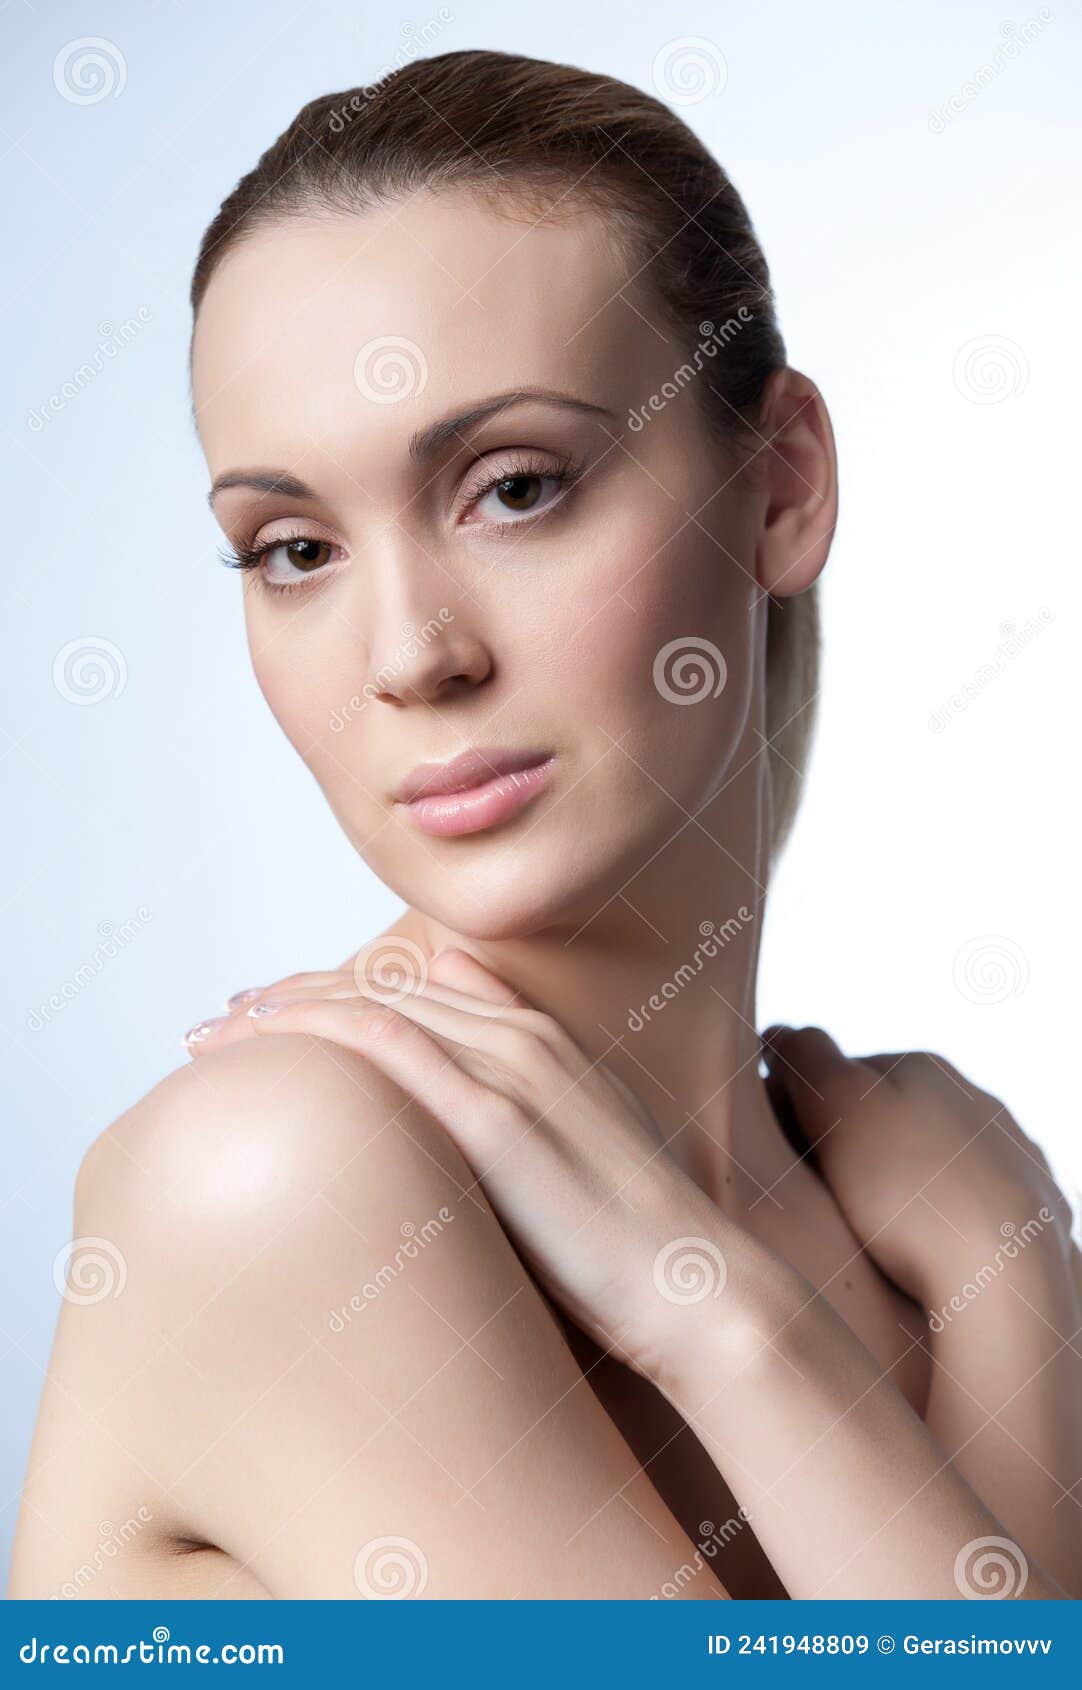 Female Beauty Vertical Portrait Shot With Nude Makeup On A White